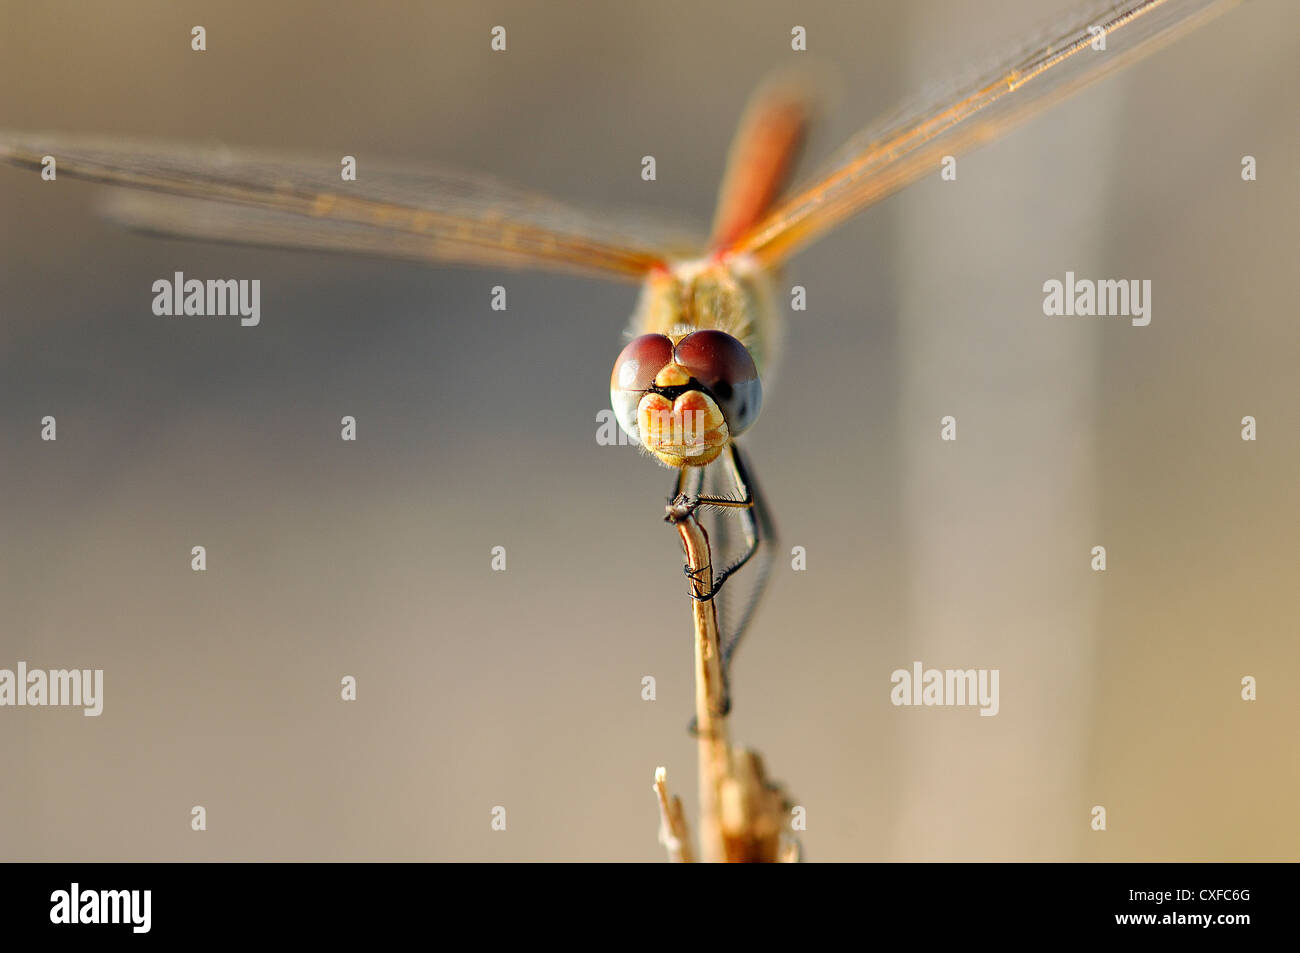 dragonfly in are natural environment Stock Photo